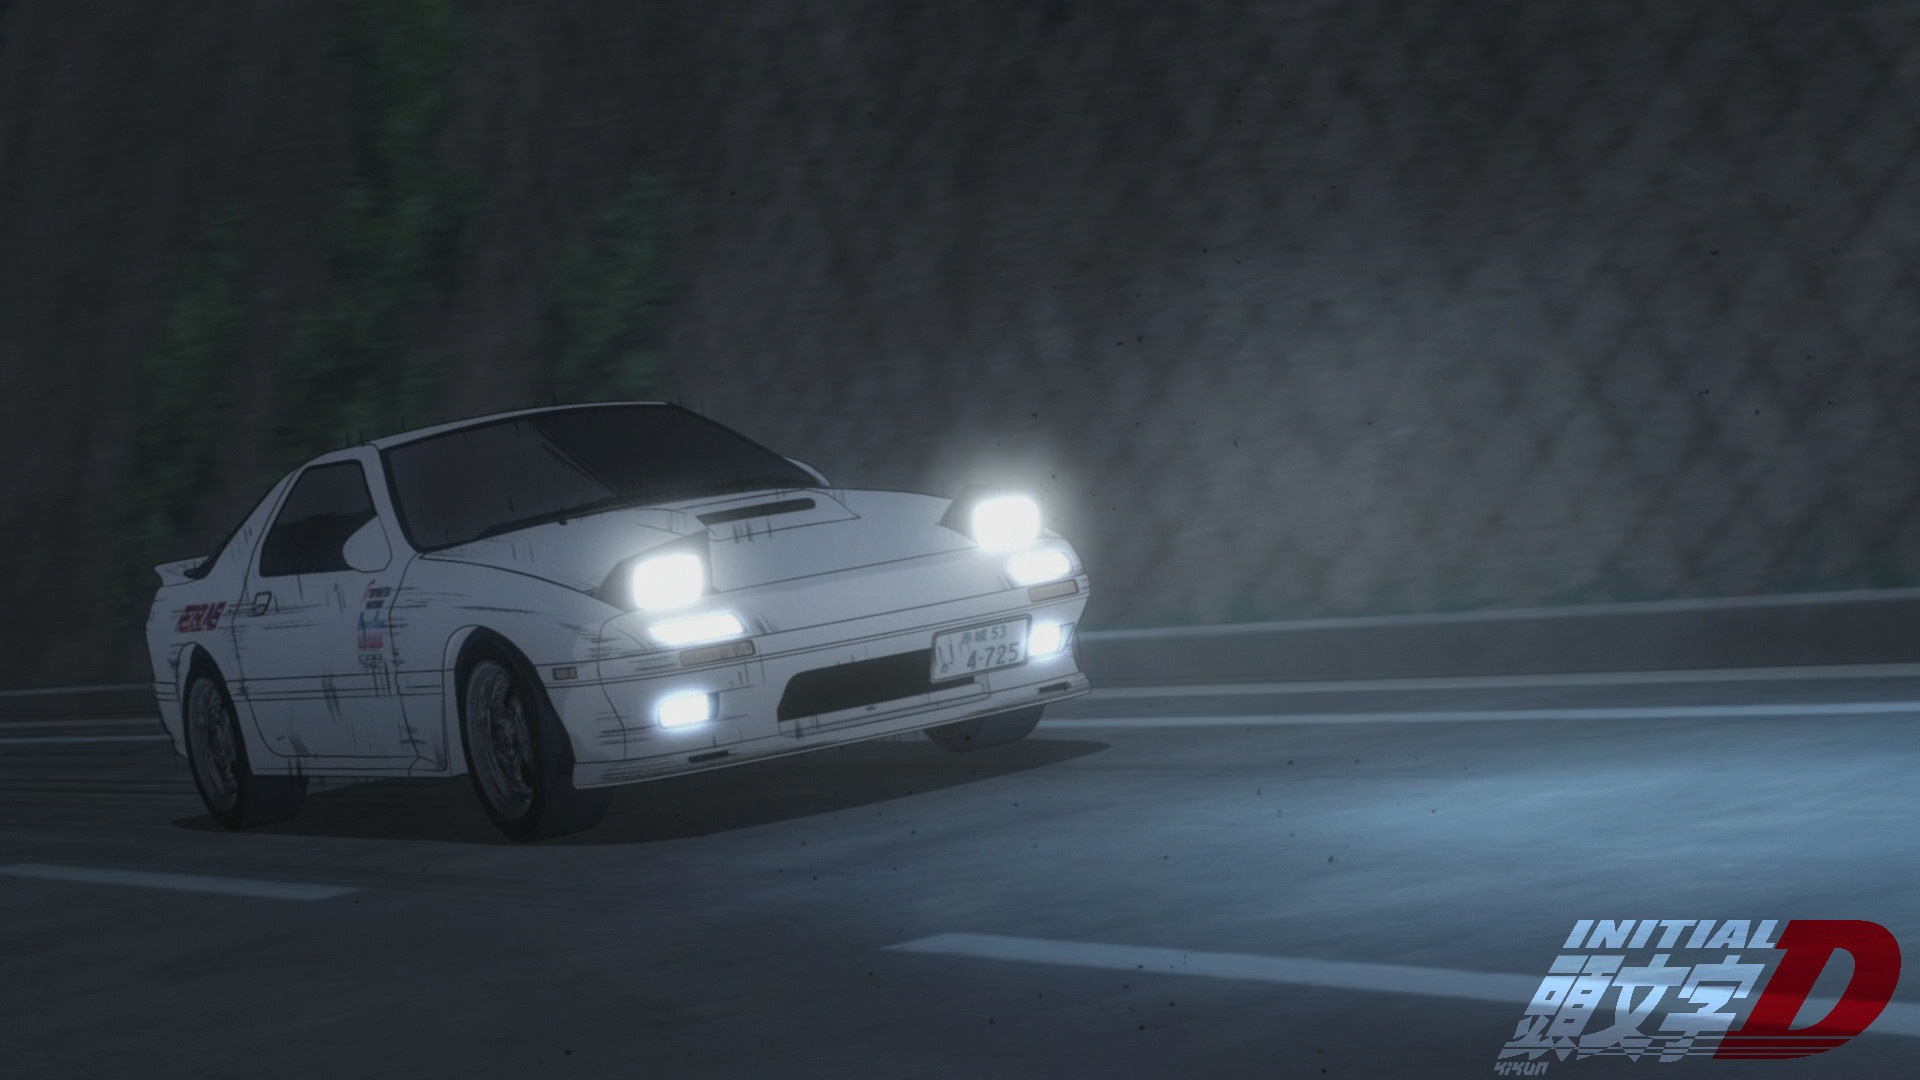 1920x1080  Initial D Wallpaper Collection